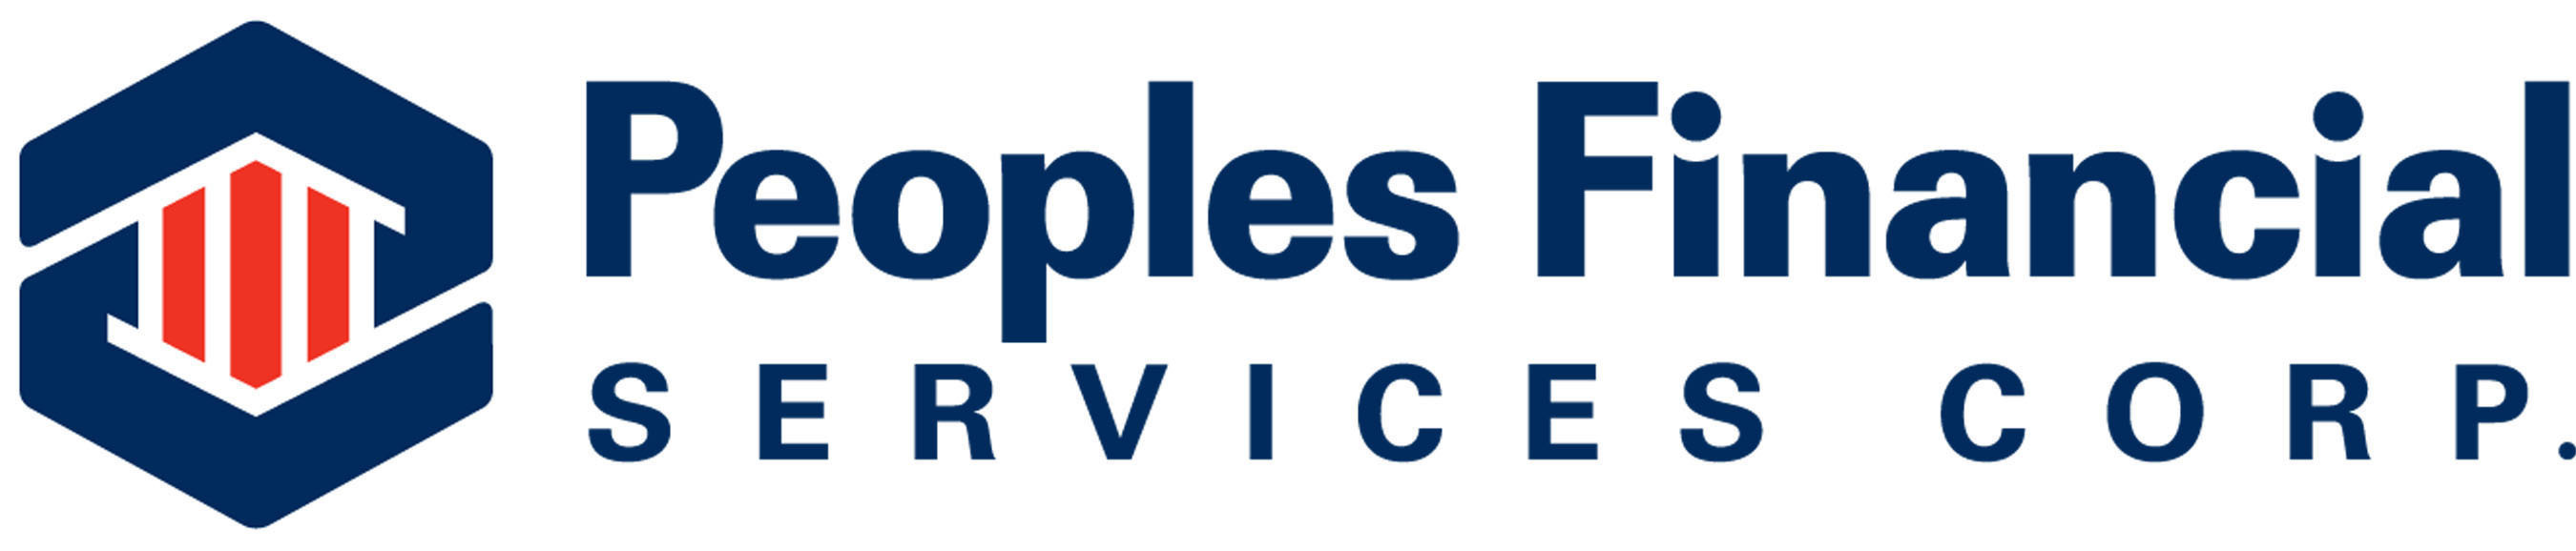 Peoples Financial Services Corp. Logo. (PRNewsFoto/Peoples Financial Services Corp.) (PRNewsFoto/PEOPLES FINANCIAL SERVICES CORP_) (PRNewsFoto/PEOPLES FINANCIAL SERVICES CORP.)